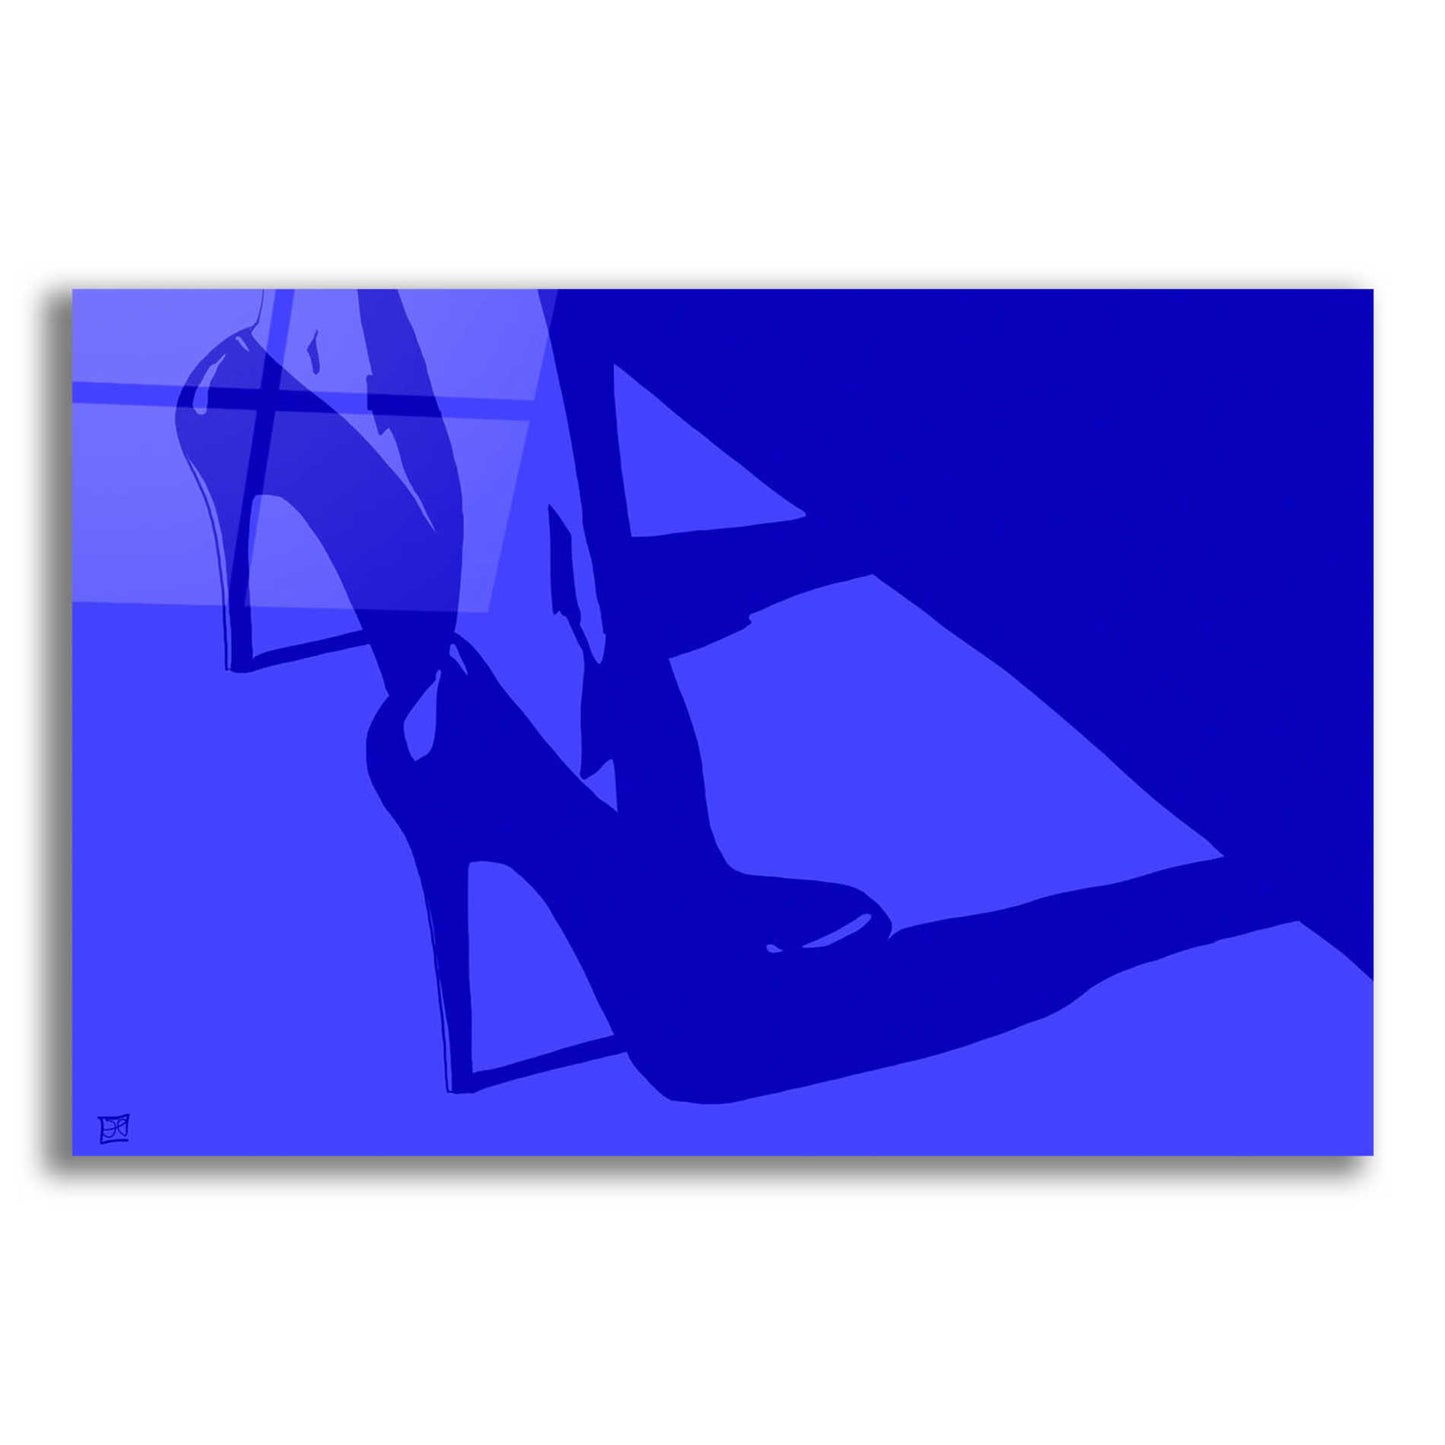 Epic Art 'Heels in blue' by Giuseppe Cristiano, Acrylic Glass Wall Art,24x16